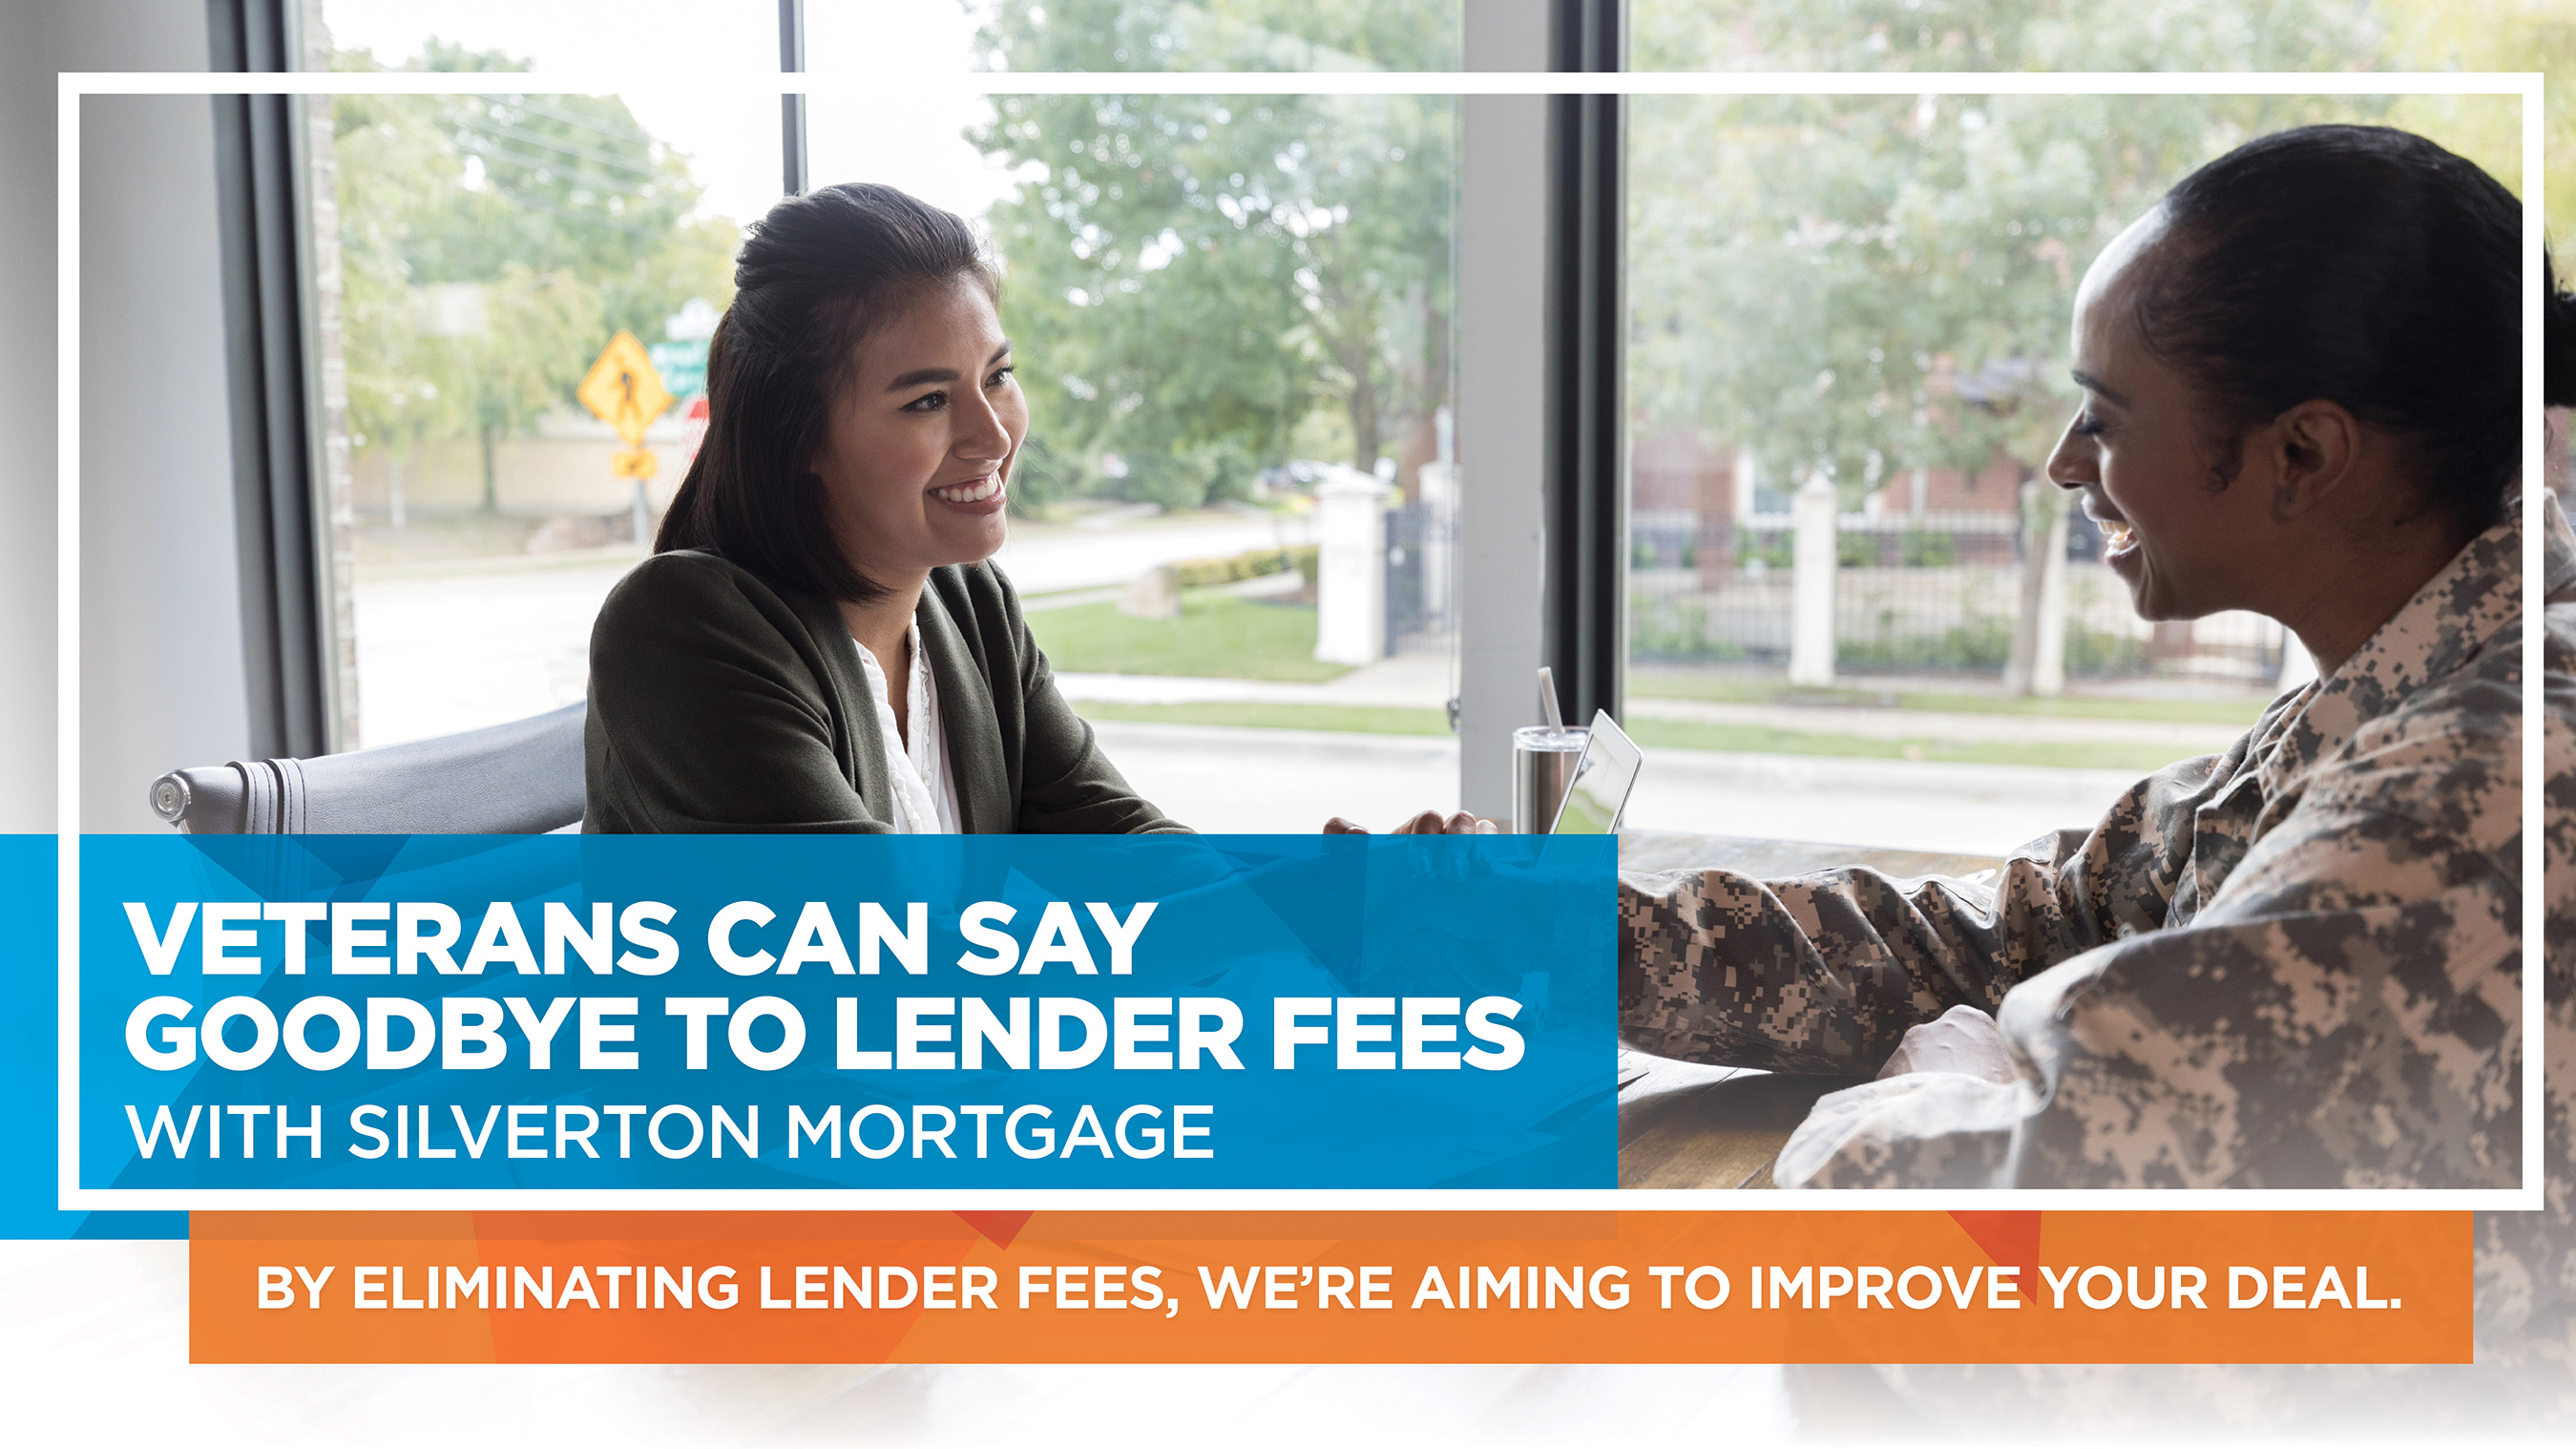 Silverton Mortgage looks forward to continuing to help eligible veterans through the VA Loan Program in 2021 and beyond.